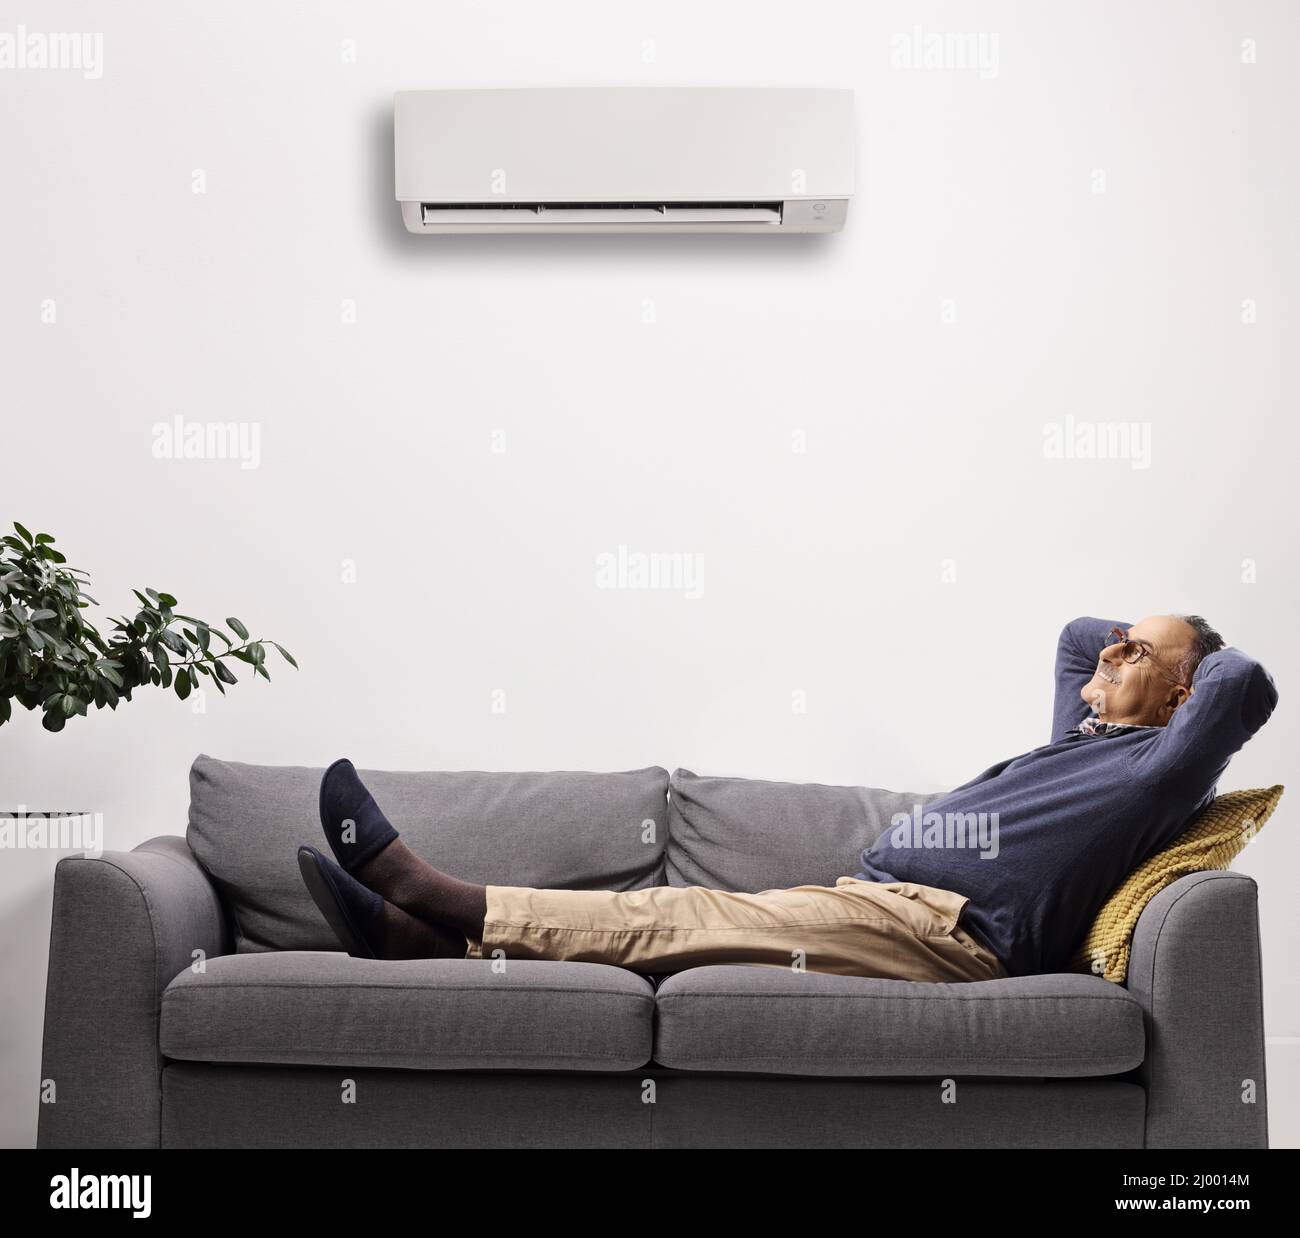 Mature man resting on a sofa under an air conditioning unit isolated on white background Stock Photo